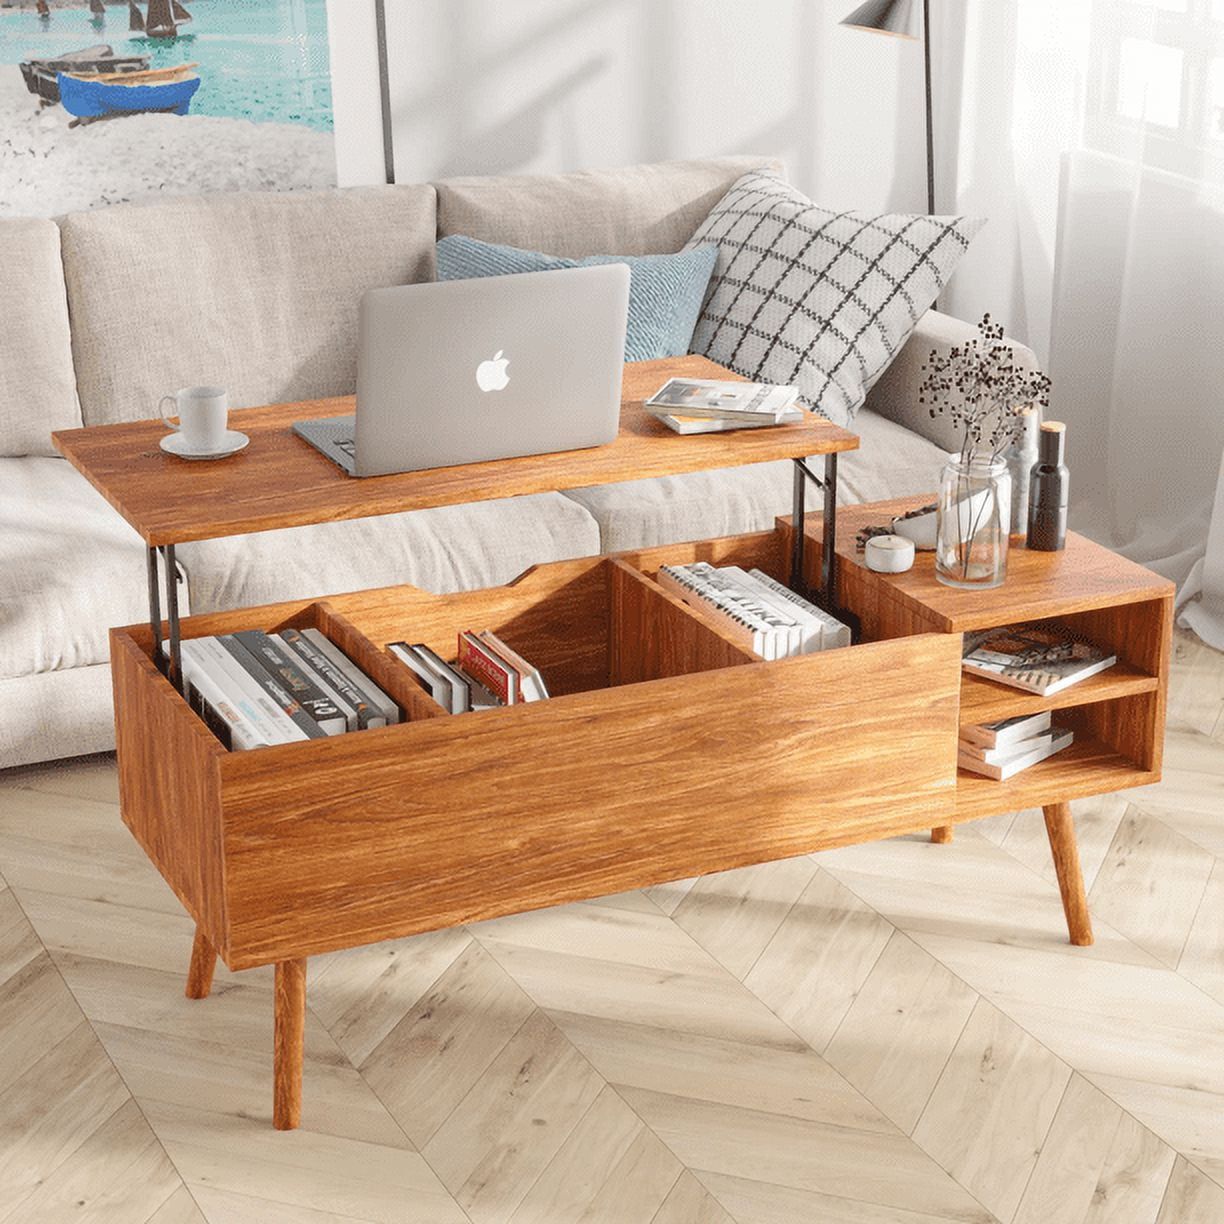 Modern Lift Top Coffee Table With Hidden Compartment India | Ubuy Inside Lift Top Coffee Tables With Storage Drawers (View 6 of 15)